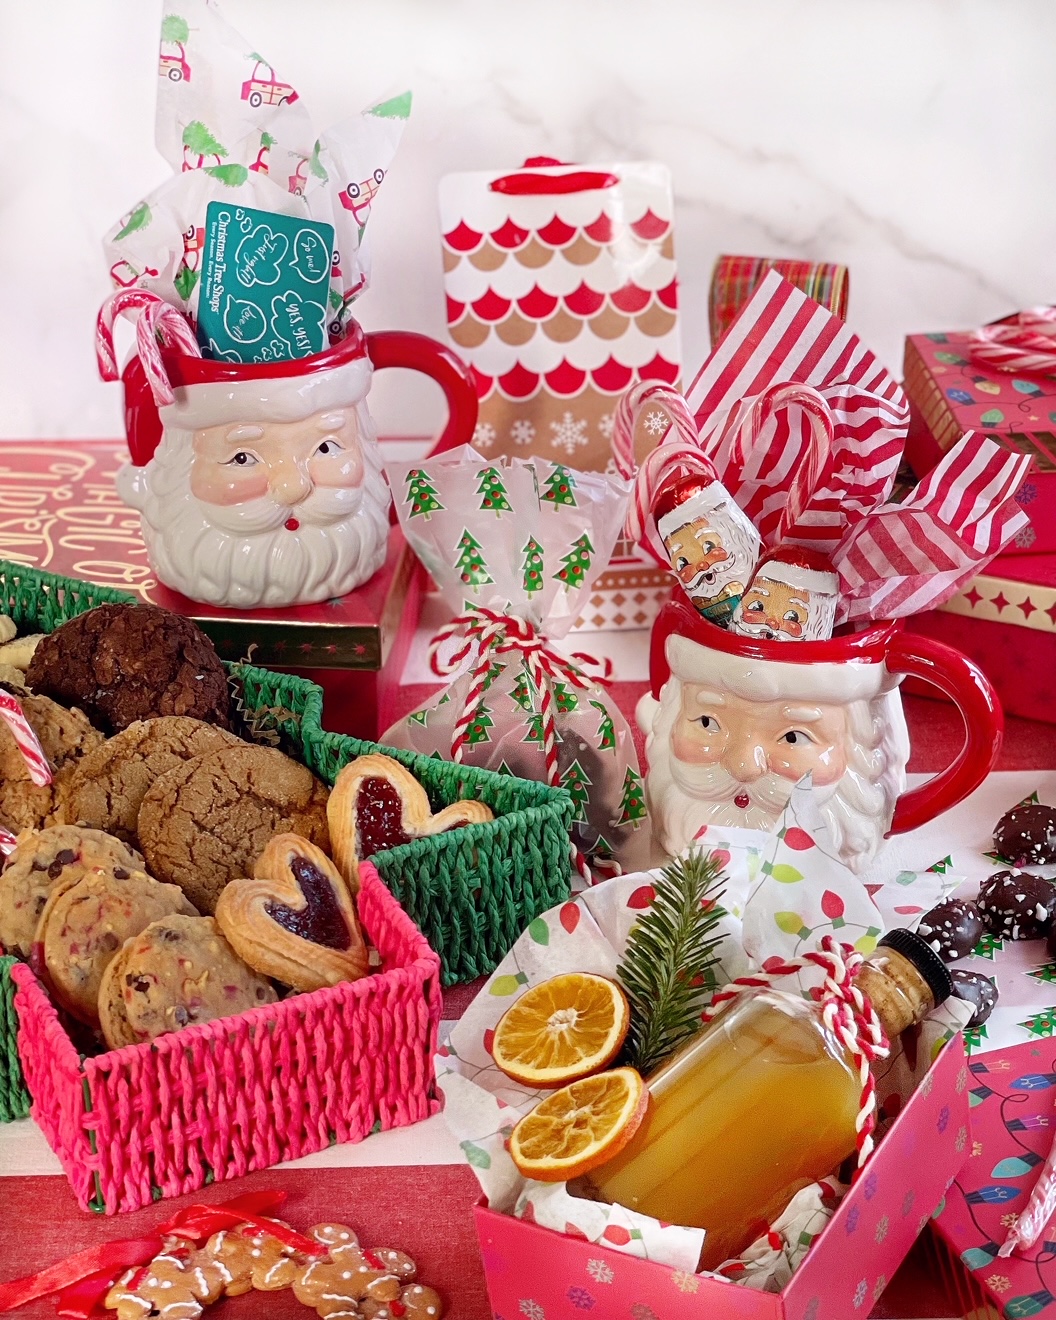 Gourmet Cookie Gift Ideas to Celebrate the New Year